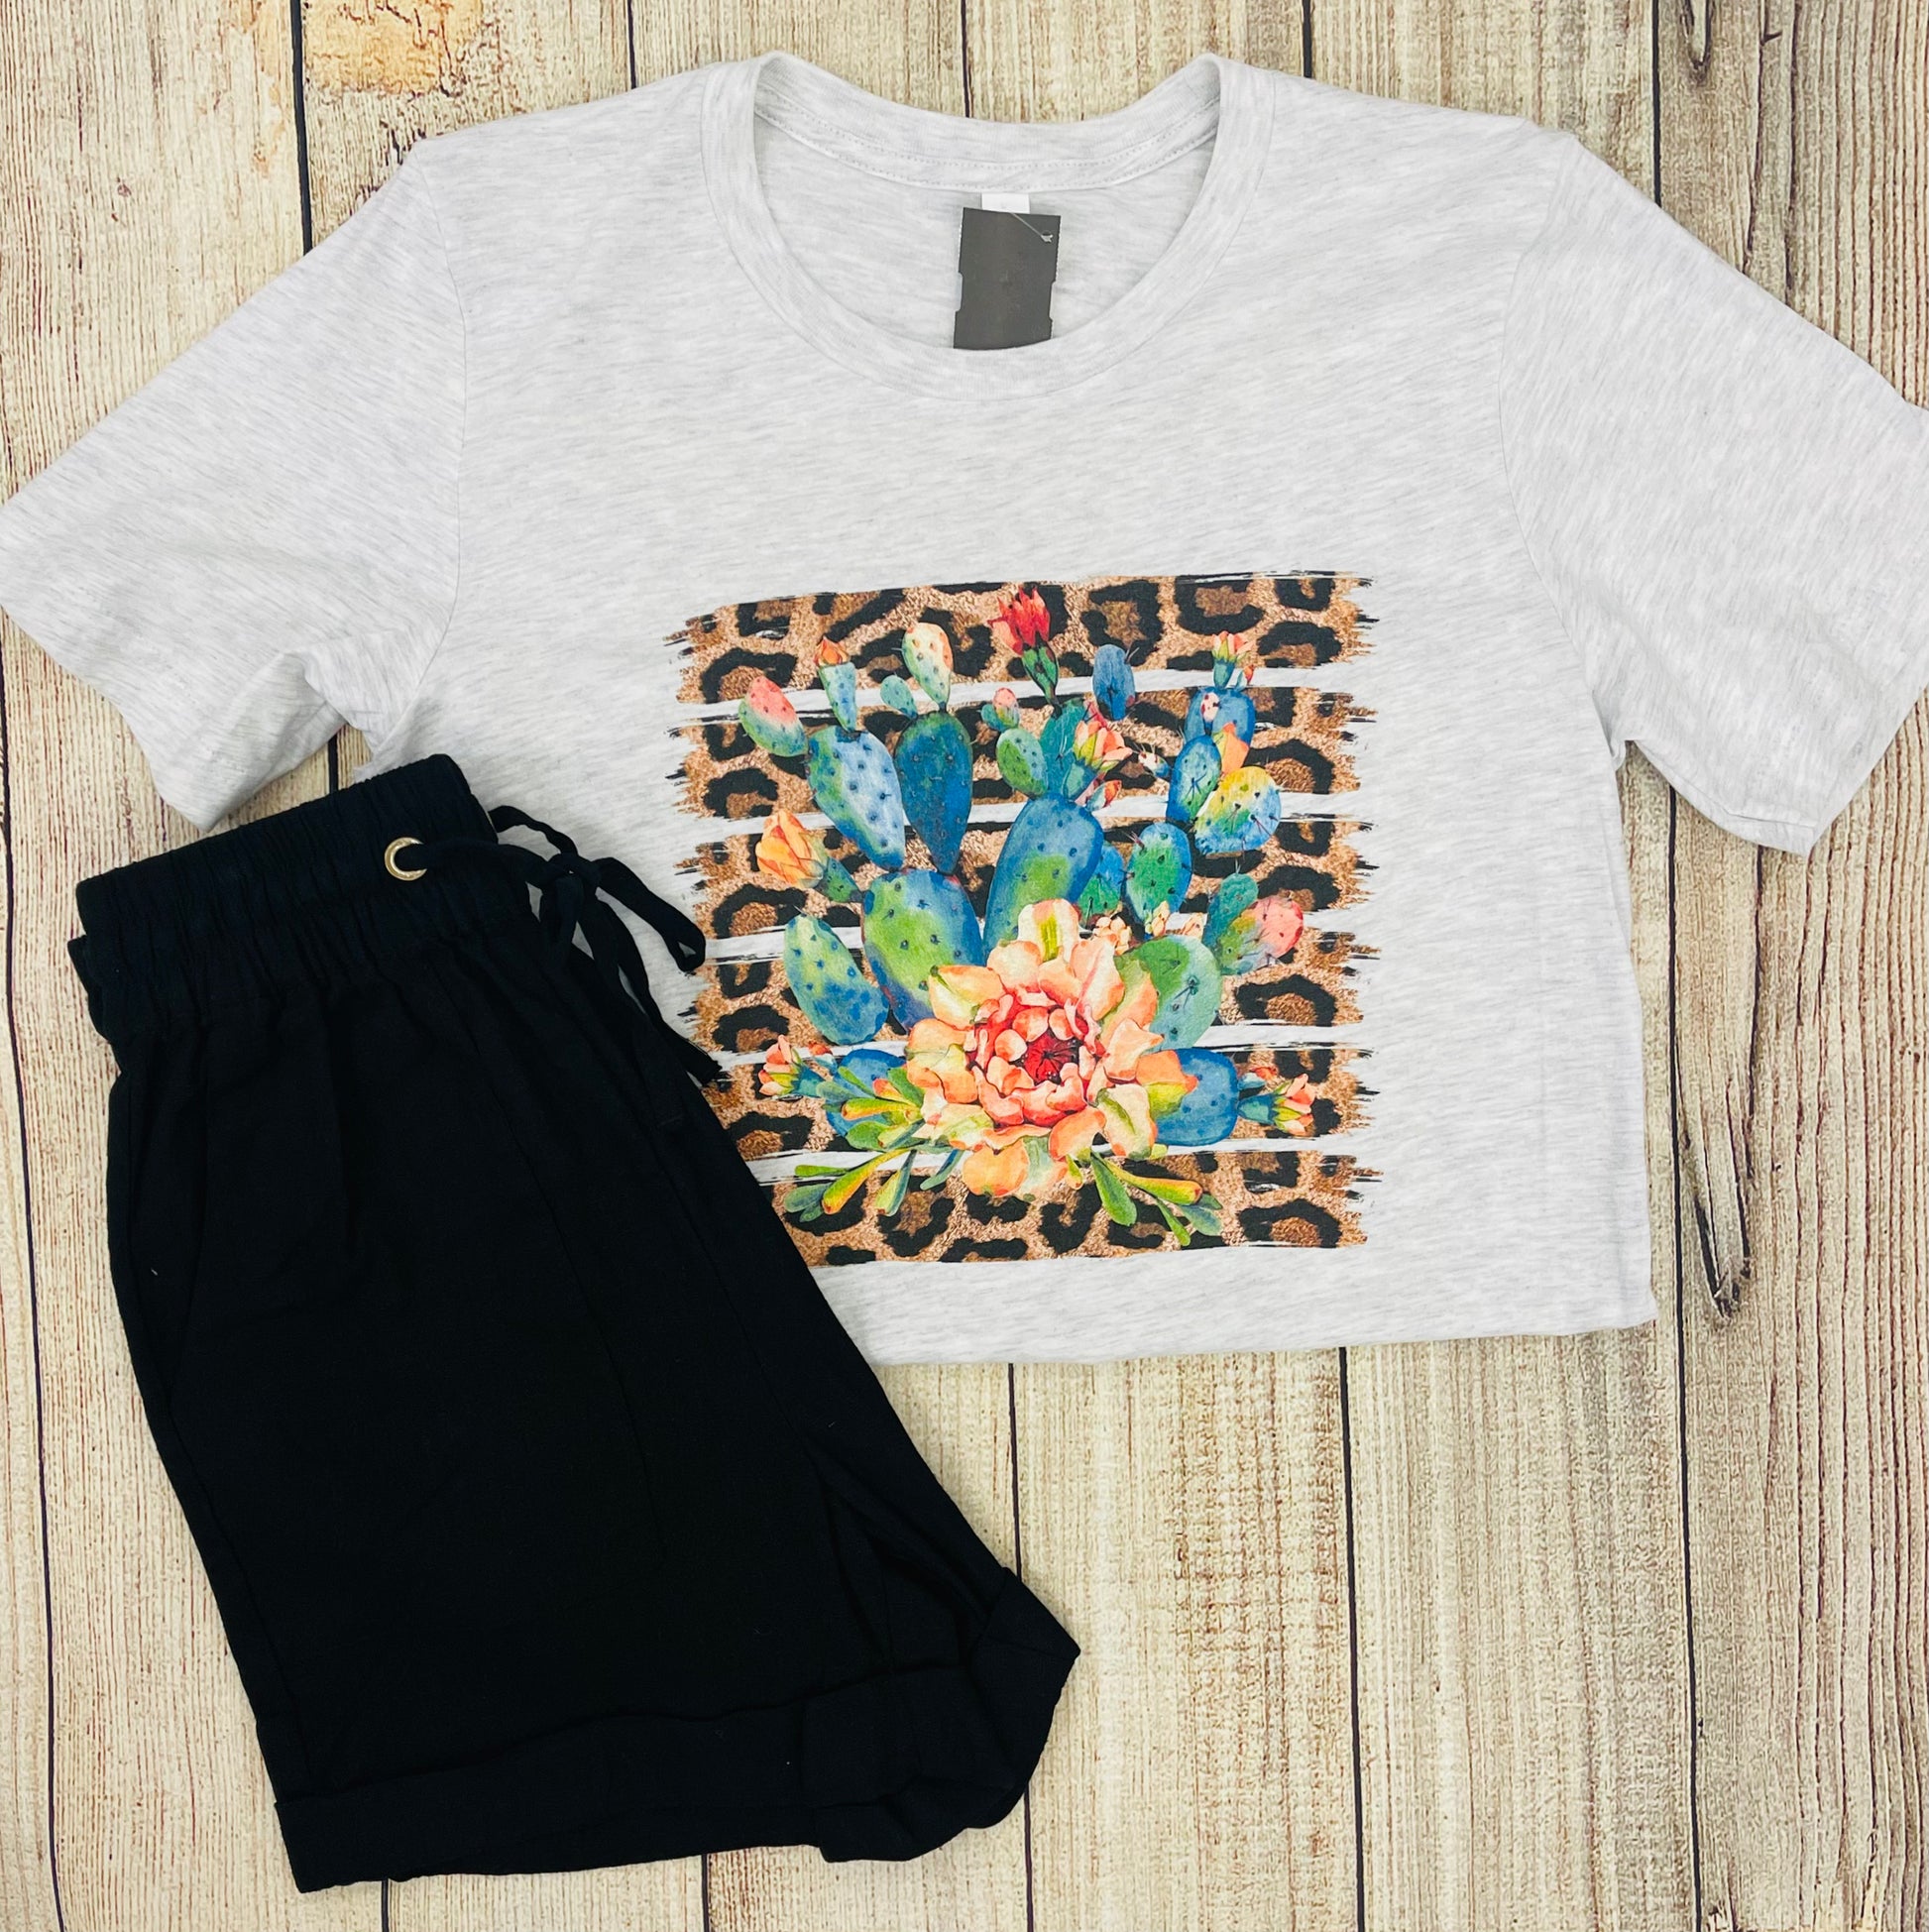 This tshirt is a heather light gray color with a crew neckline. It is a regular unisex fit with a graphic featuring a leopard background and a colorful array of blue, orange, and red cactus. 